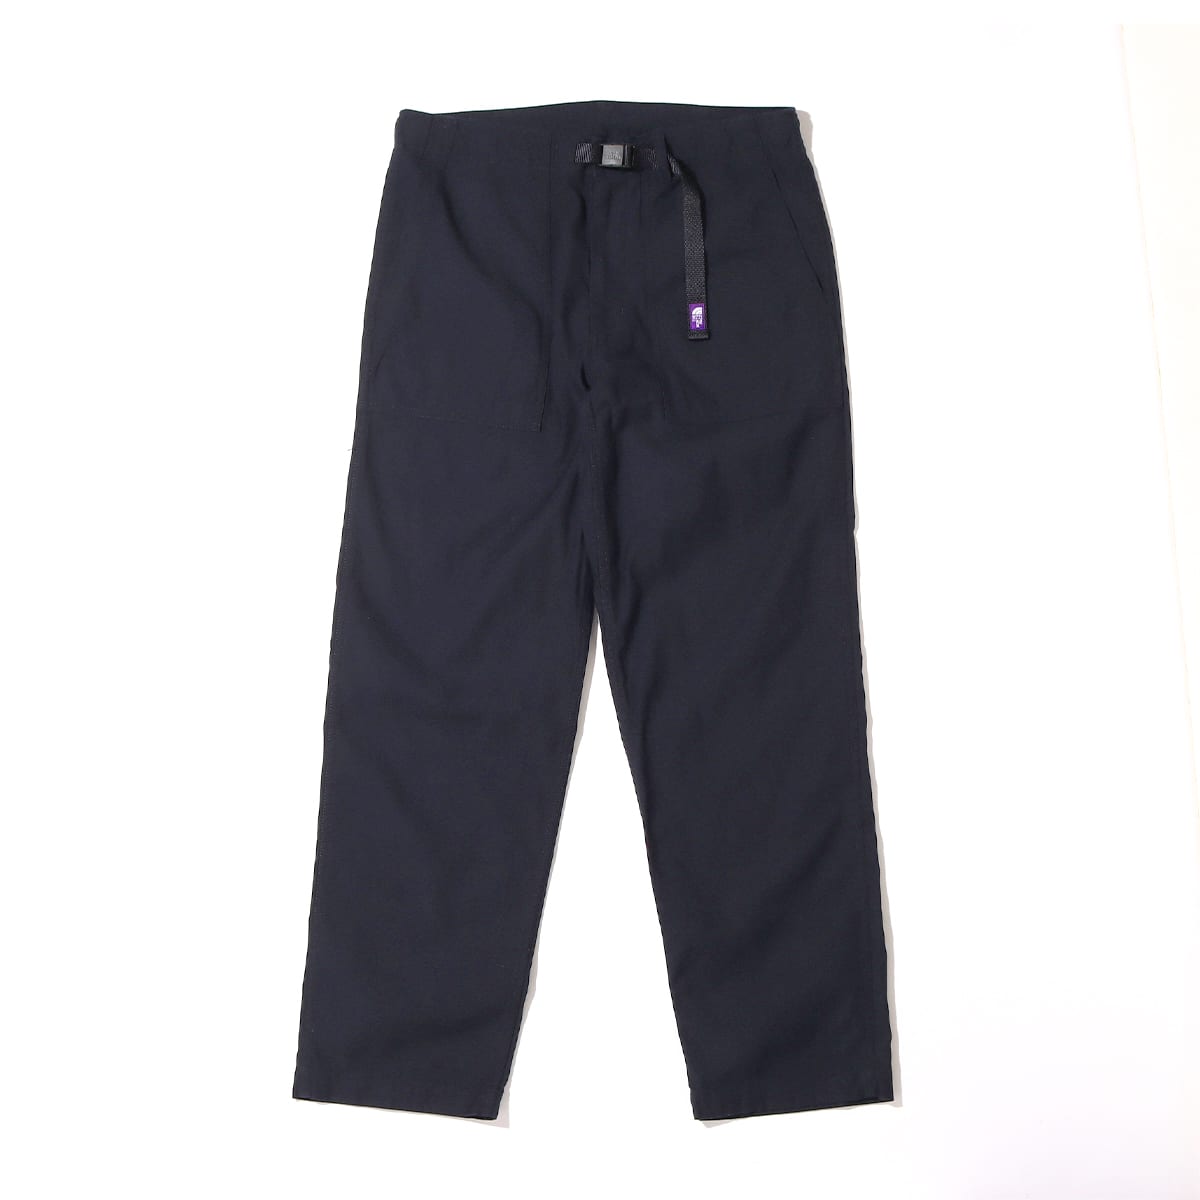 THE NORTH FACE PURPLE LABEL Field Baker Pants Navy 22FW-I